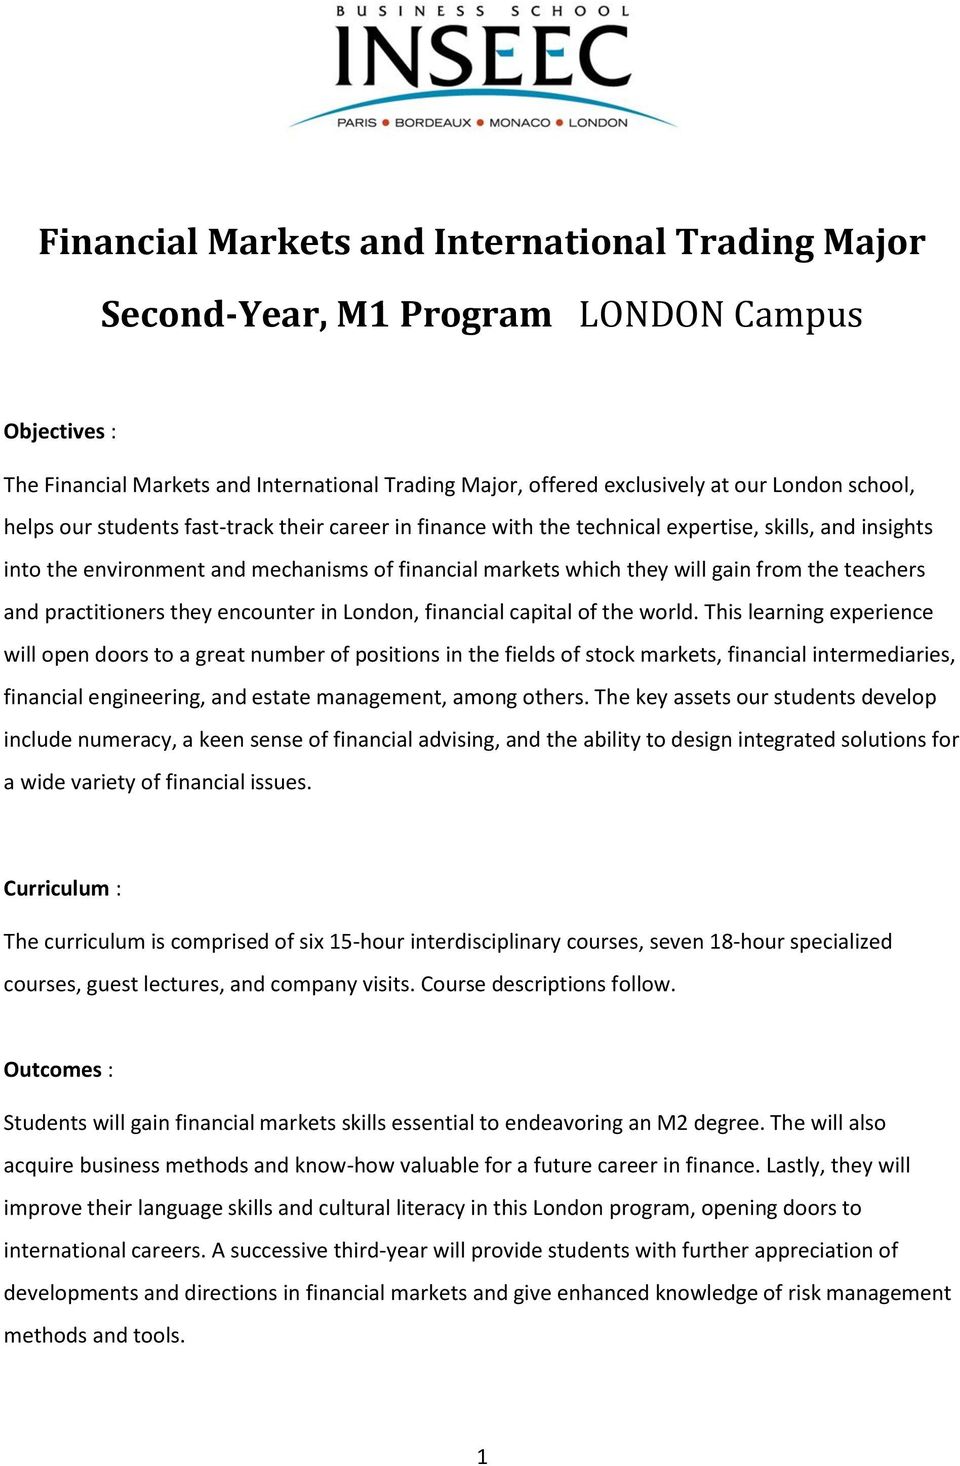 teachers and practitioners they encounter in London, financial capital of the world.